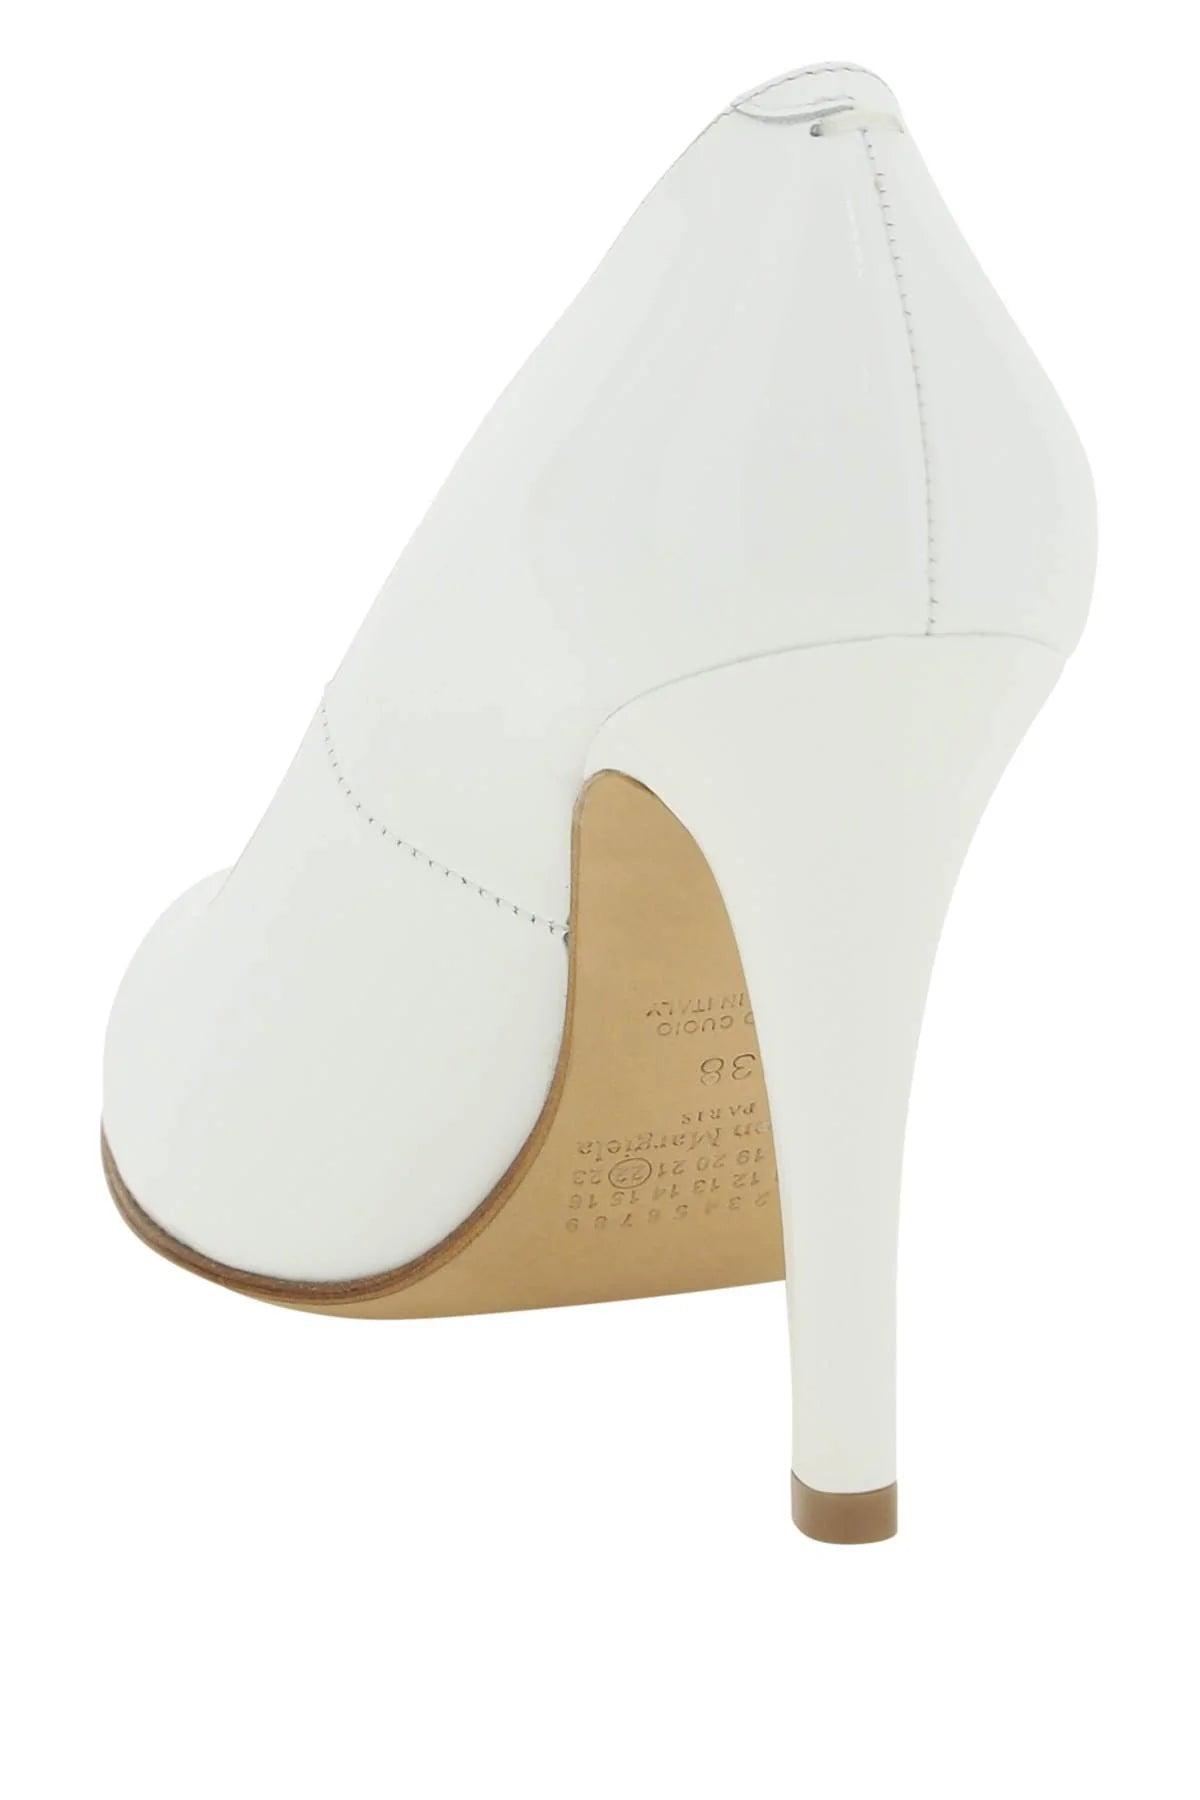 Maison Margiela Patent Leather Pumps in White | Lyst